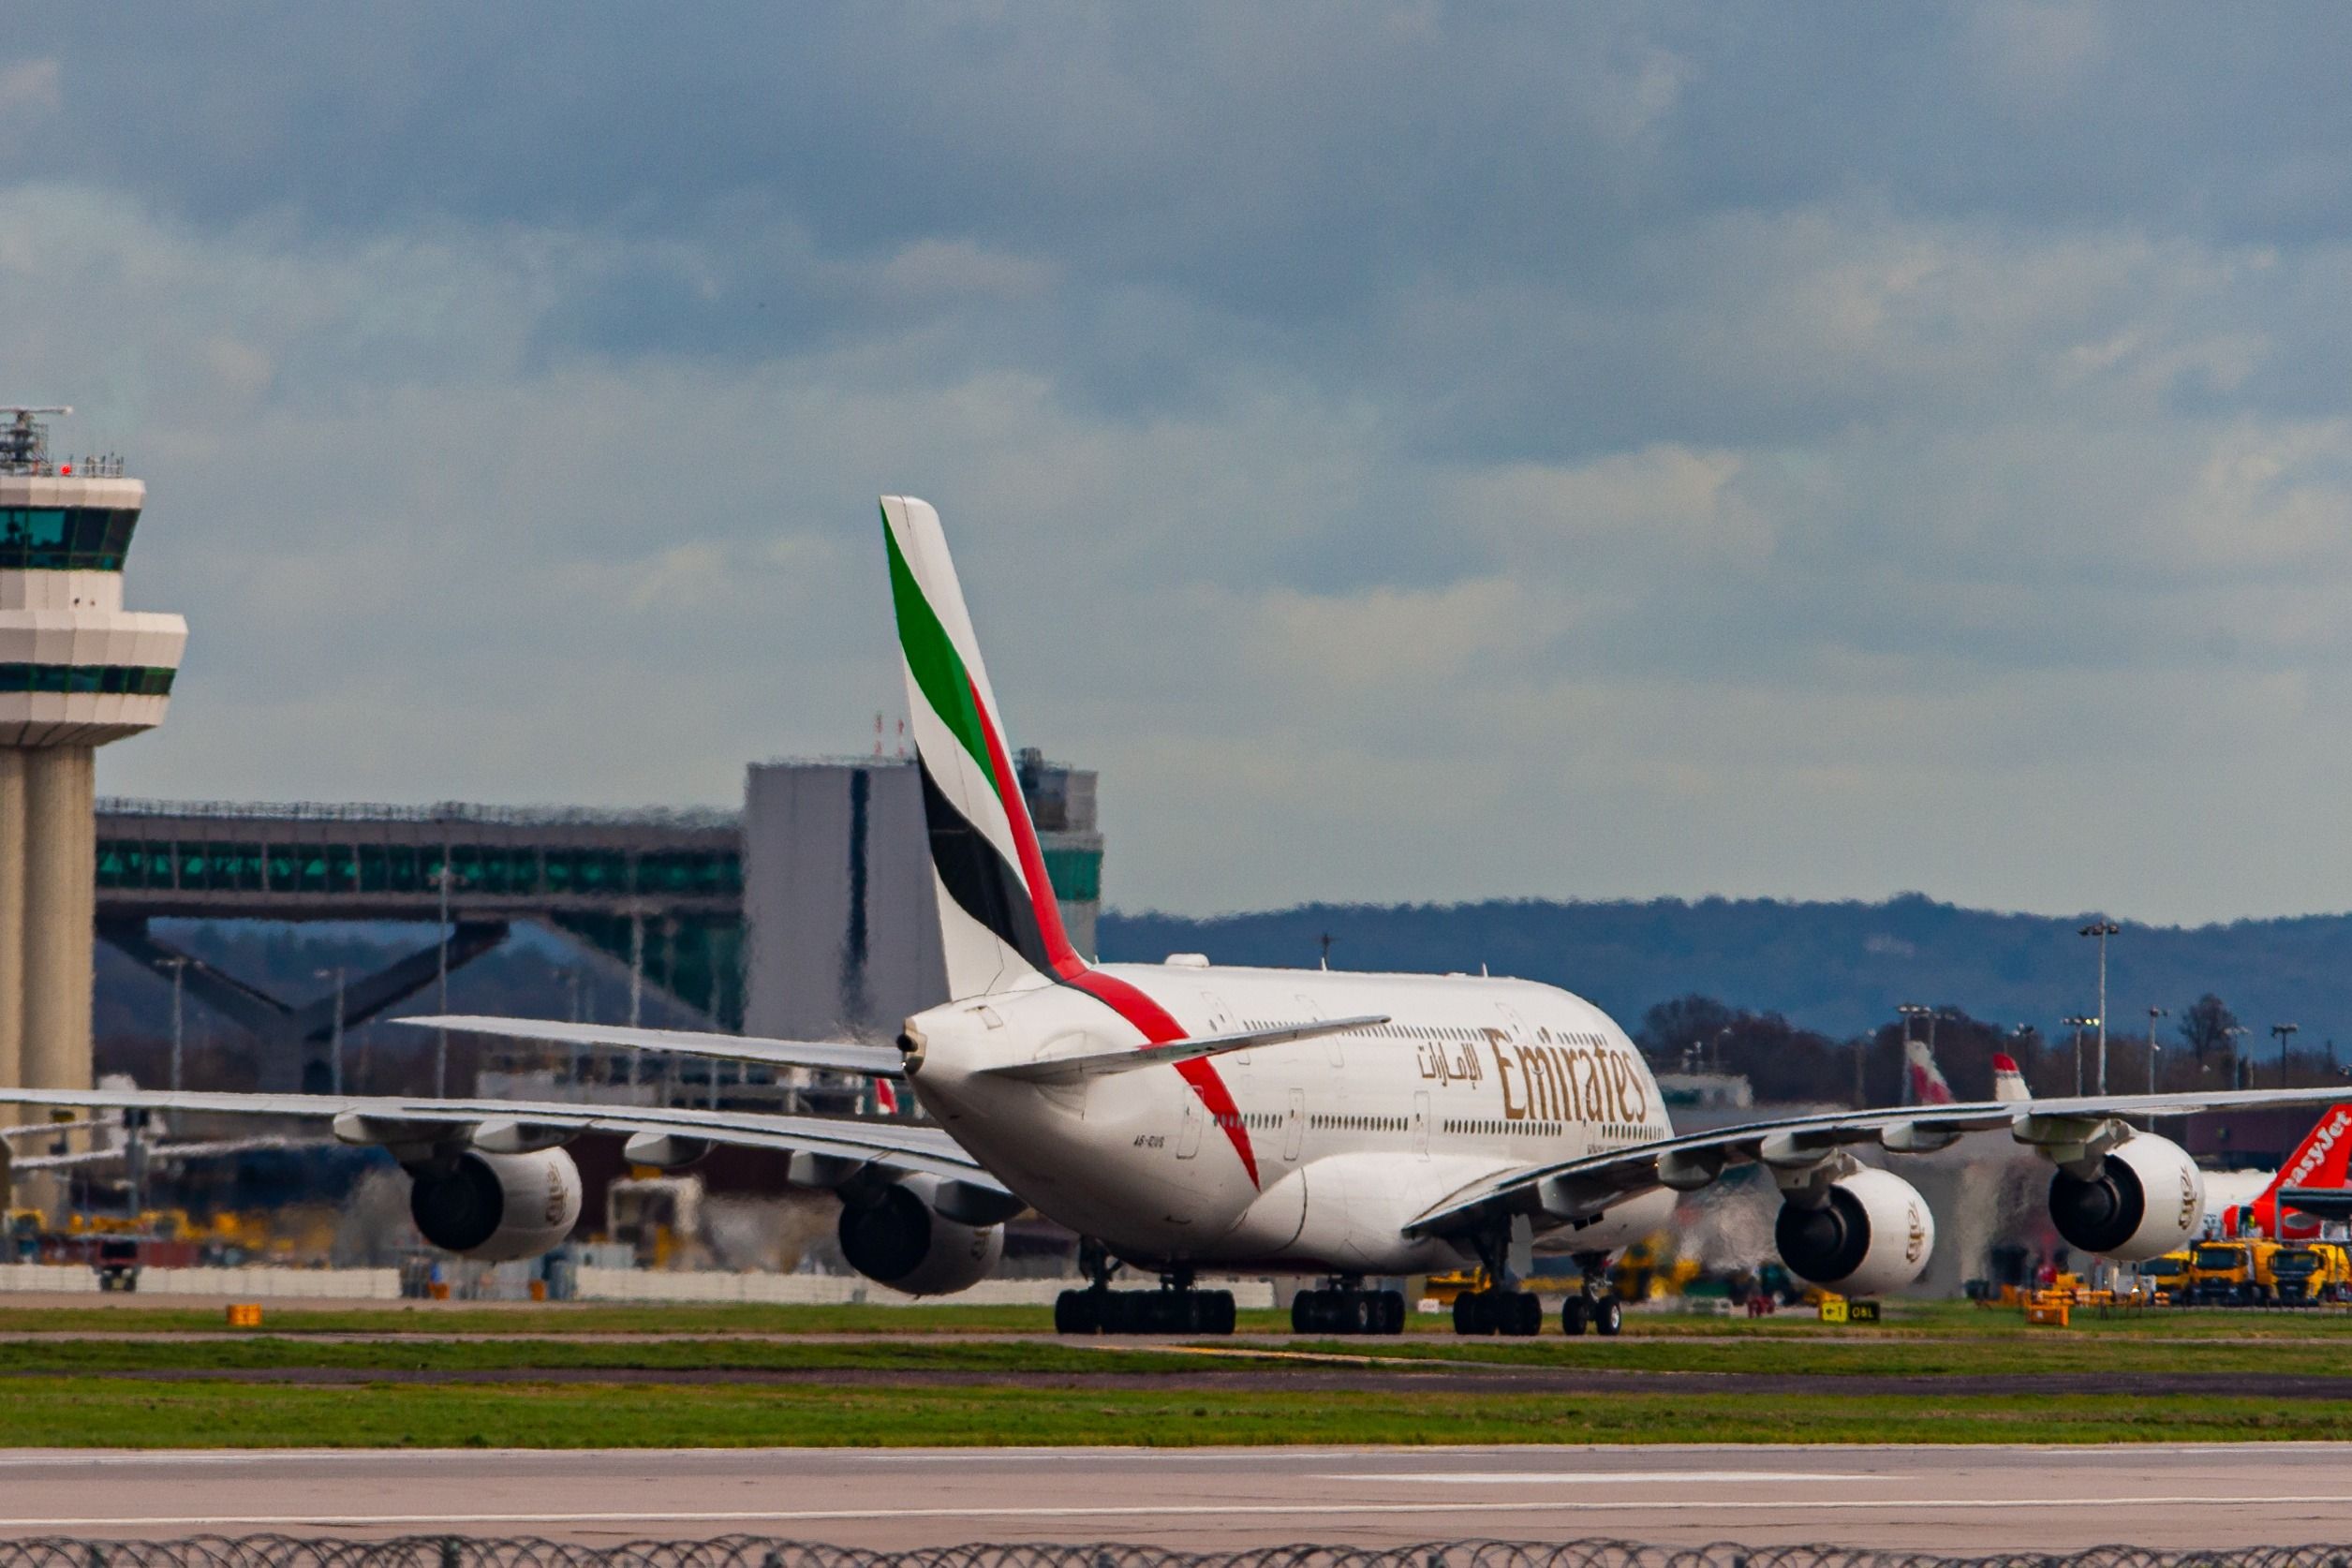 Emirates Airbus A380 on the runway of London Gatwick Airport LGW